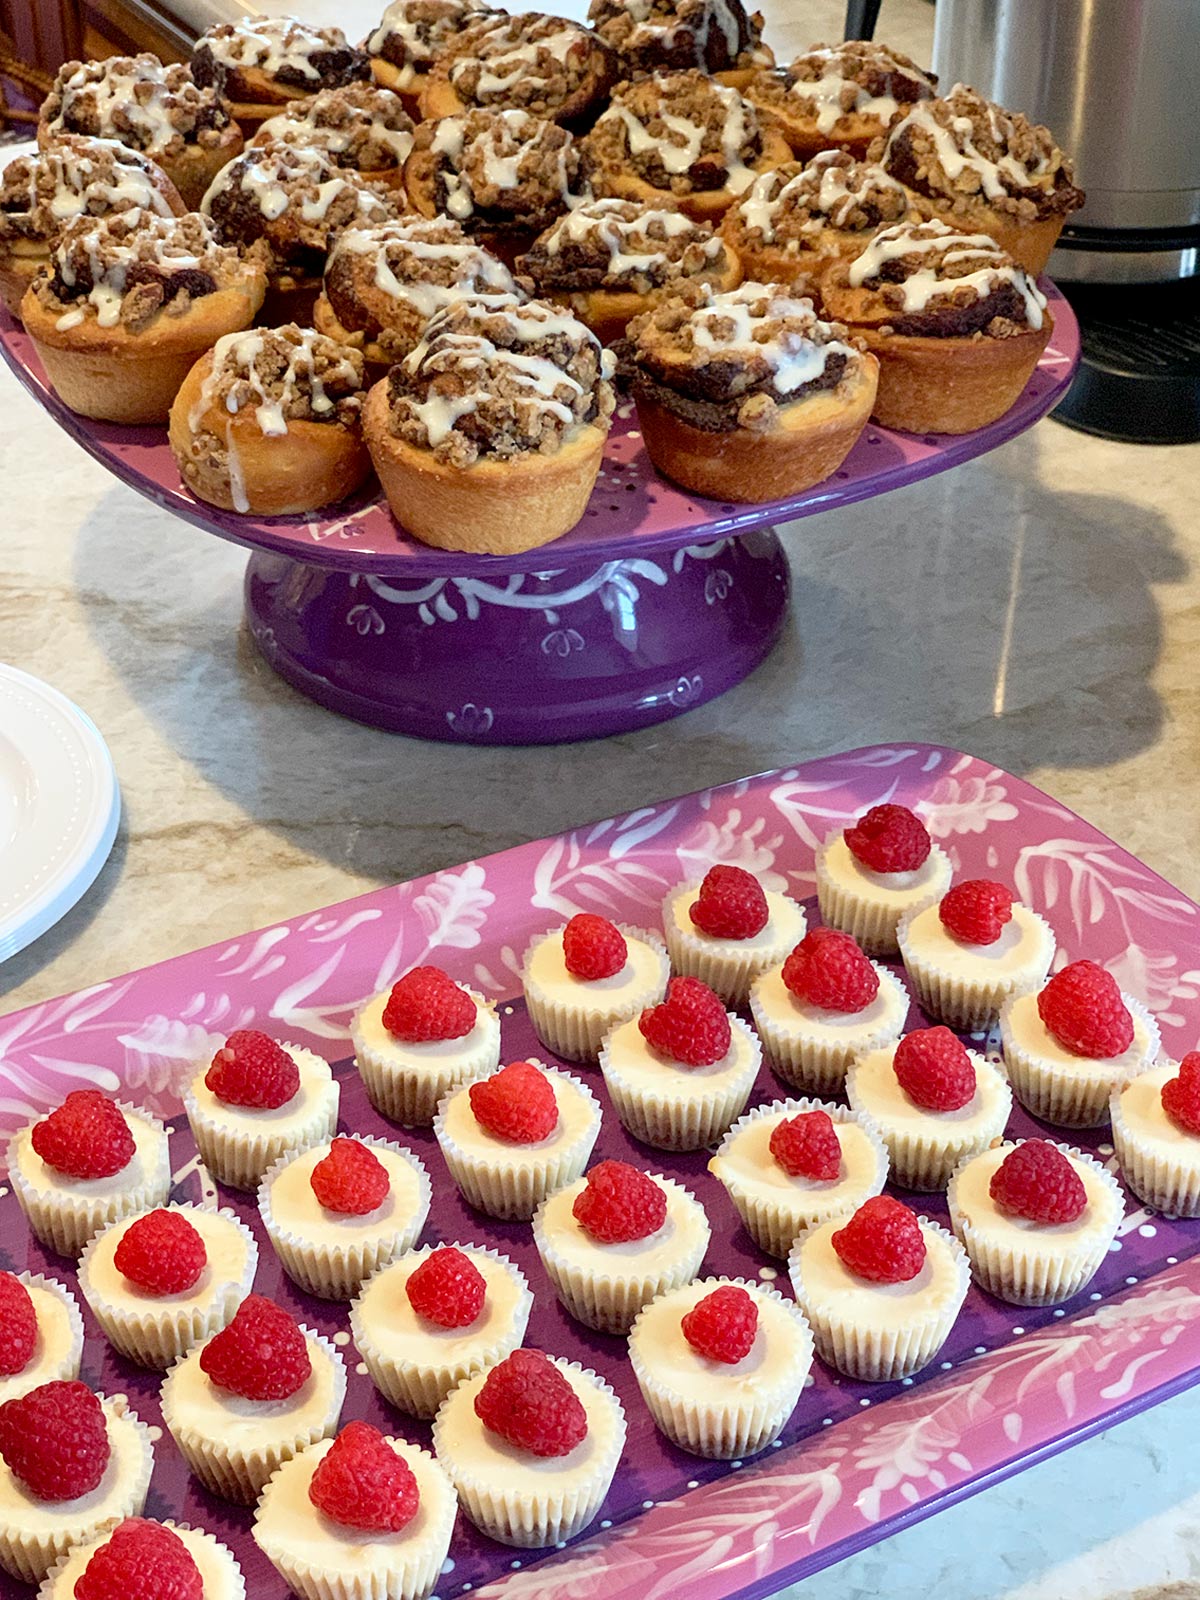 Mini cheesecakes on a purple platter with mini babkas in the background.